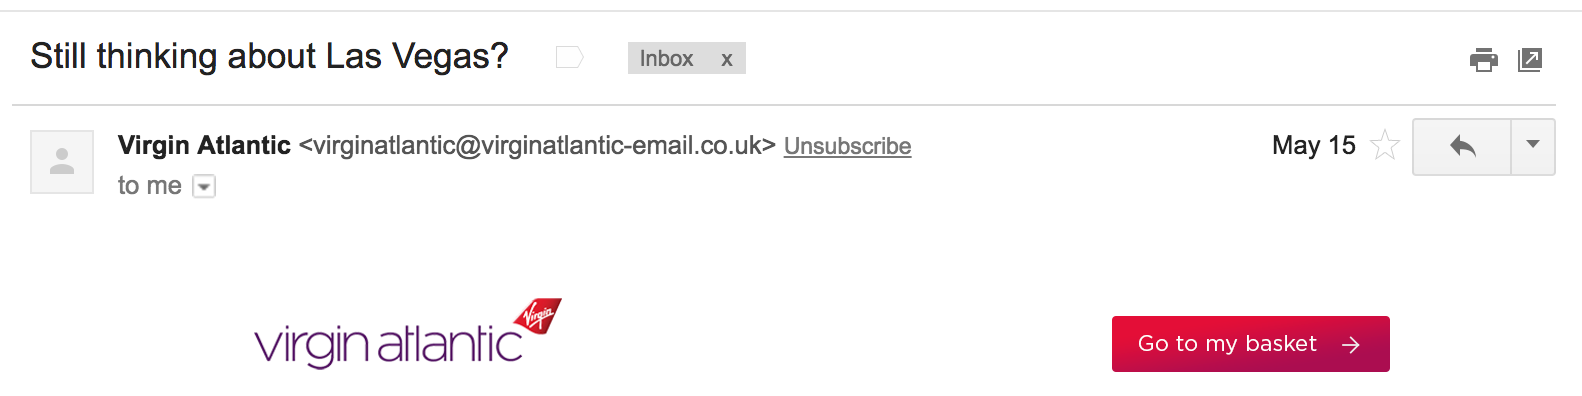 Best Email Subject Lines: Screenshot of email from Virgin Atlantic